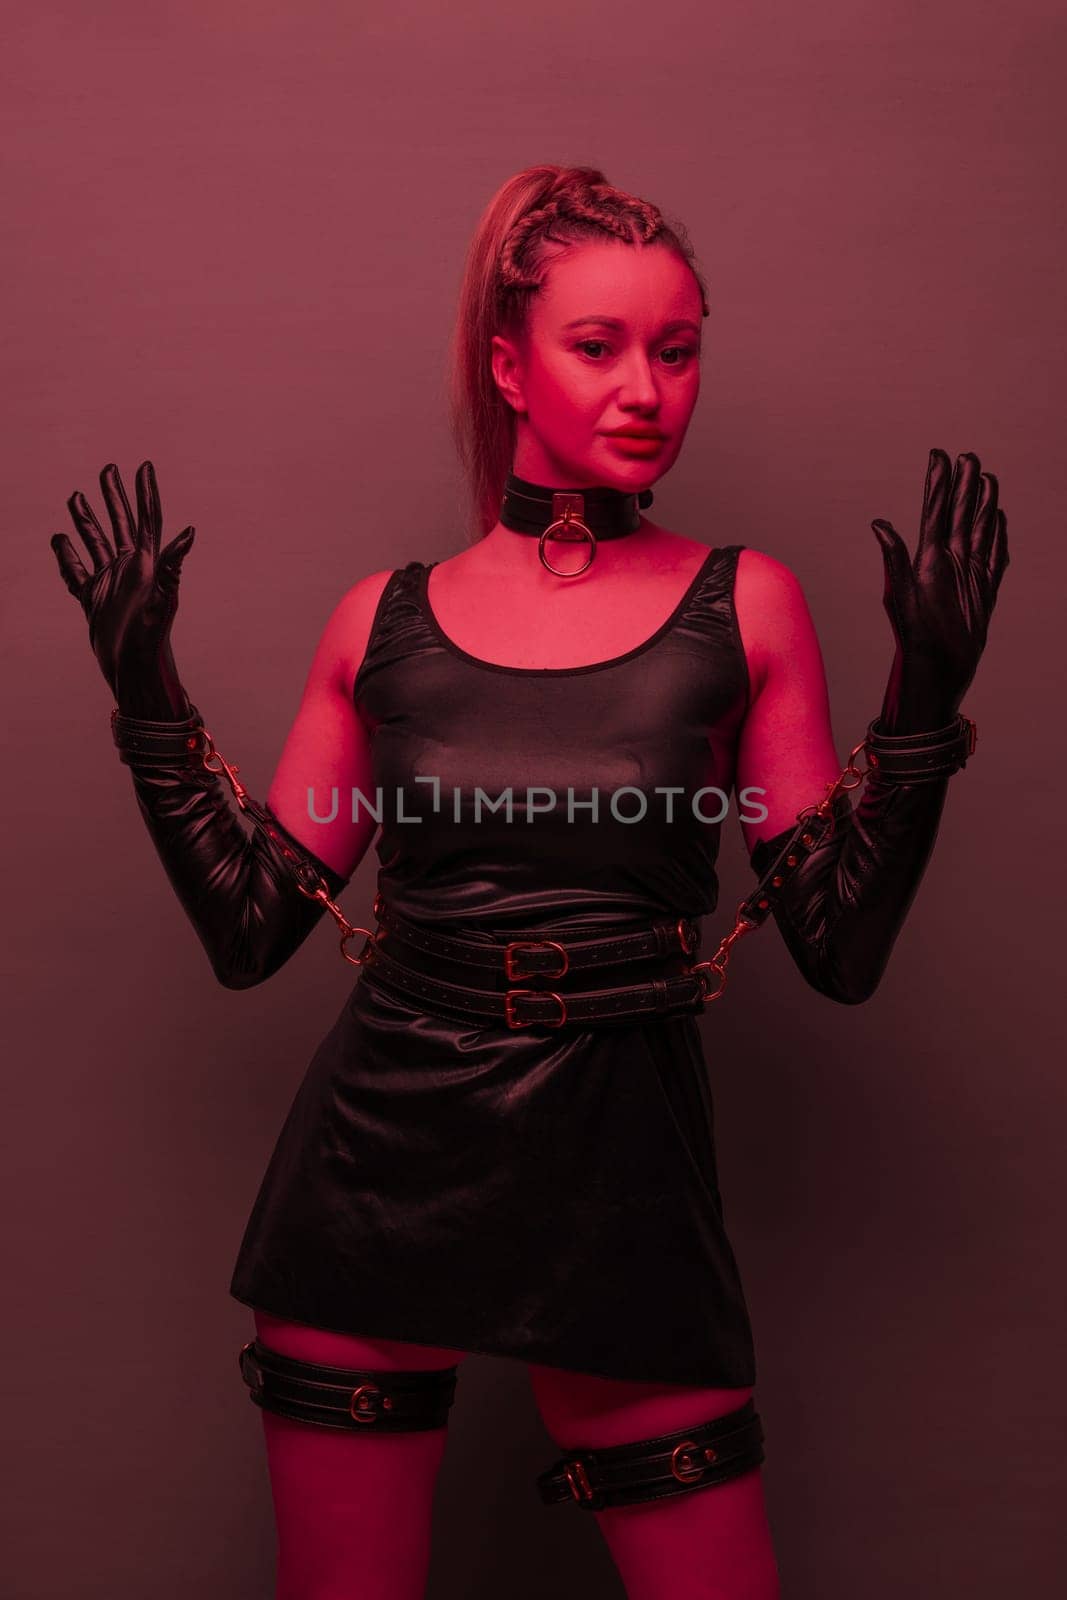 Beautiful young woman in a leather dress and bondage set posing on red light backgound by zartarn